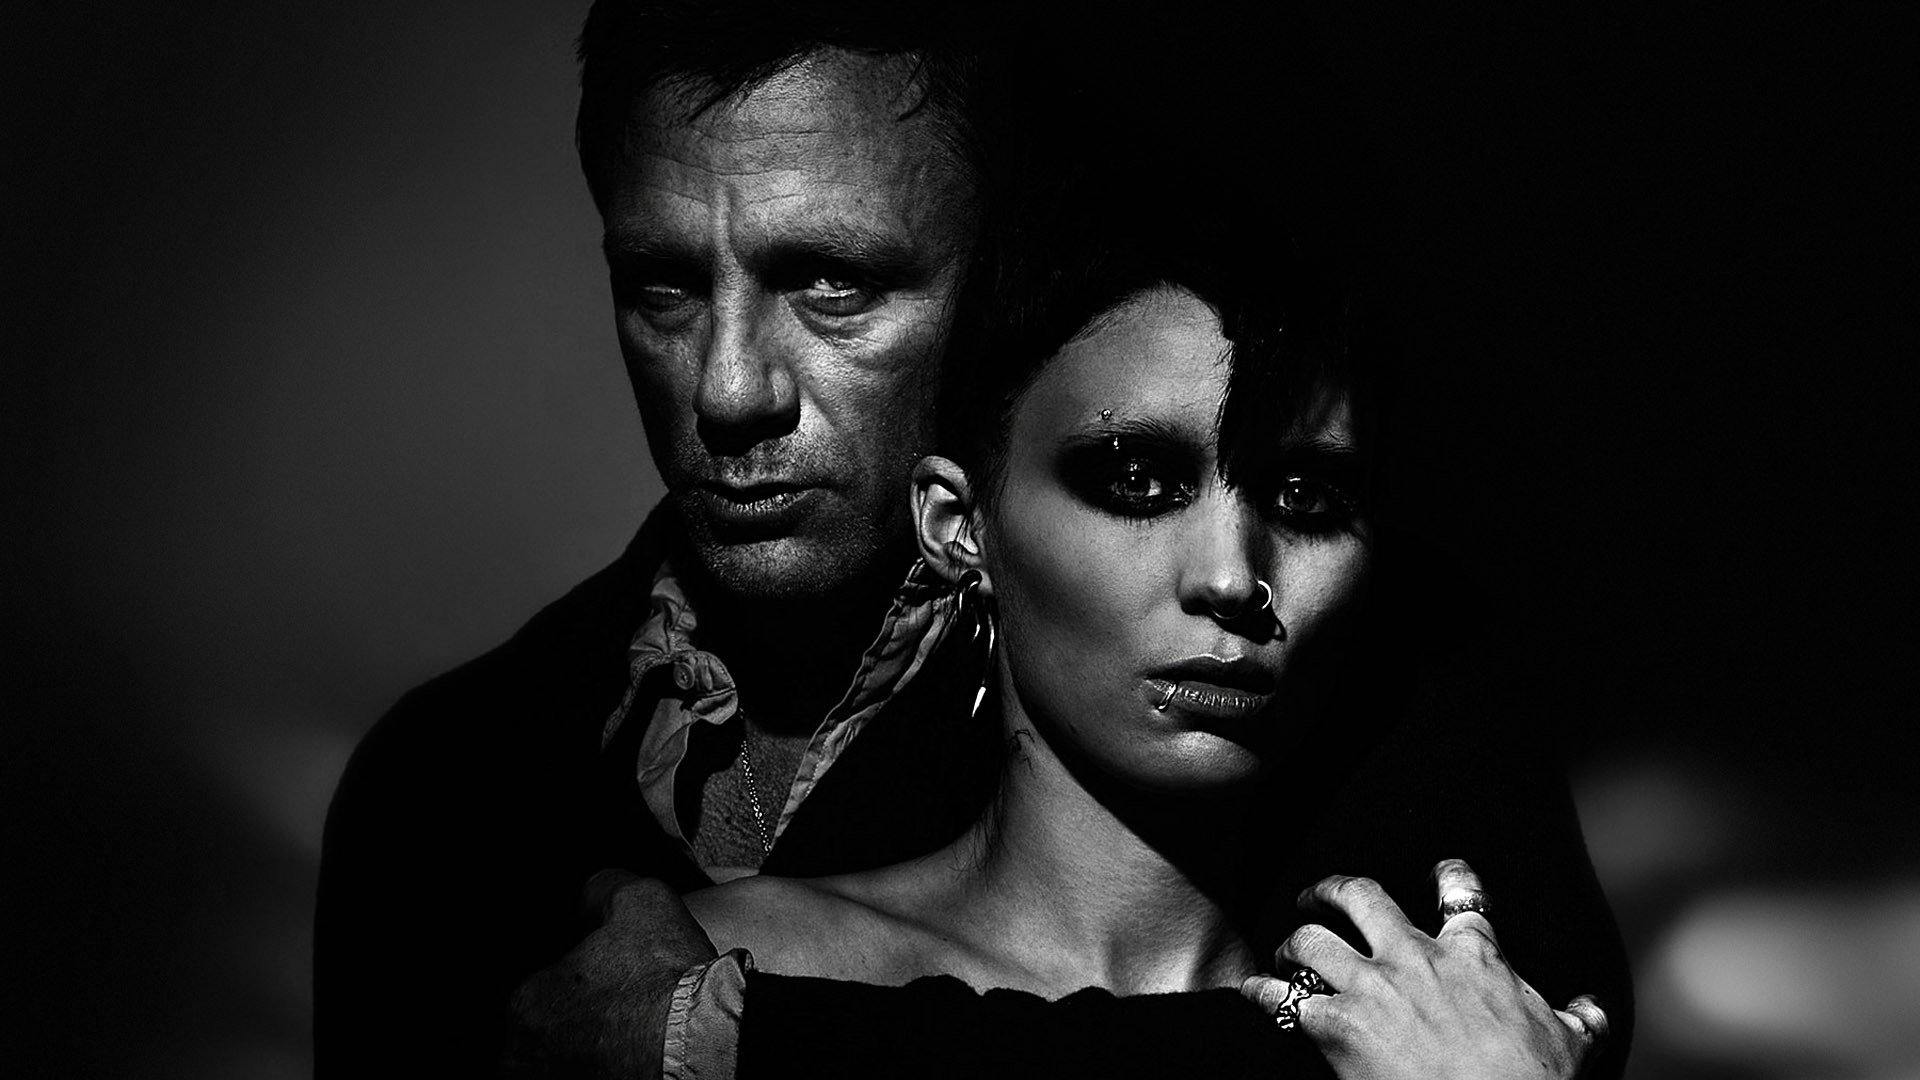 Book Review: The Psychology of the Girl with the Dragon Tattoo